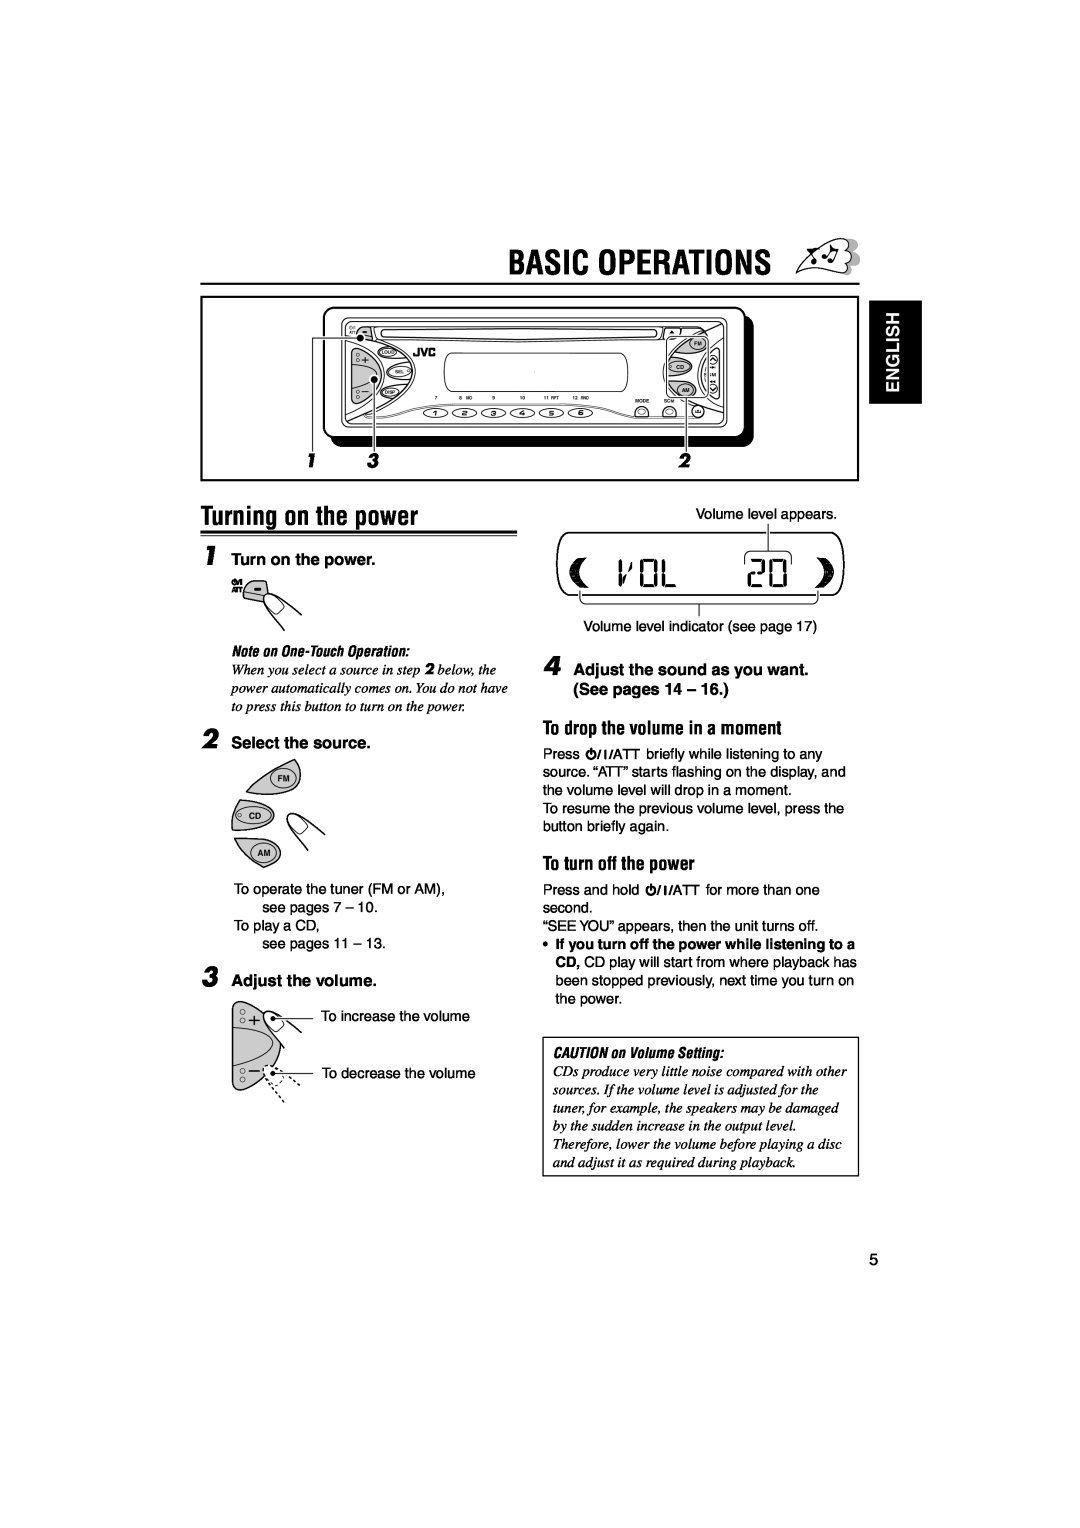 JVC KD-S641 Basic Operations, To drop the volume in a moment, To turn off the power, Turning on the power, English, 8 MO 